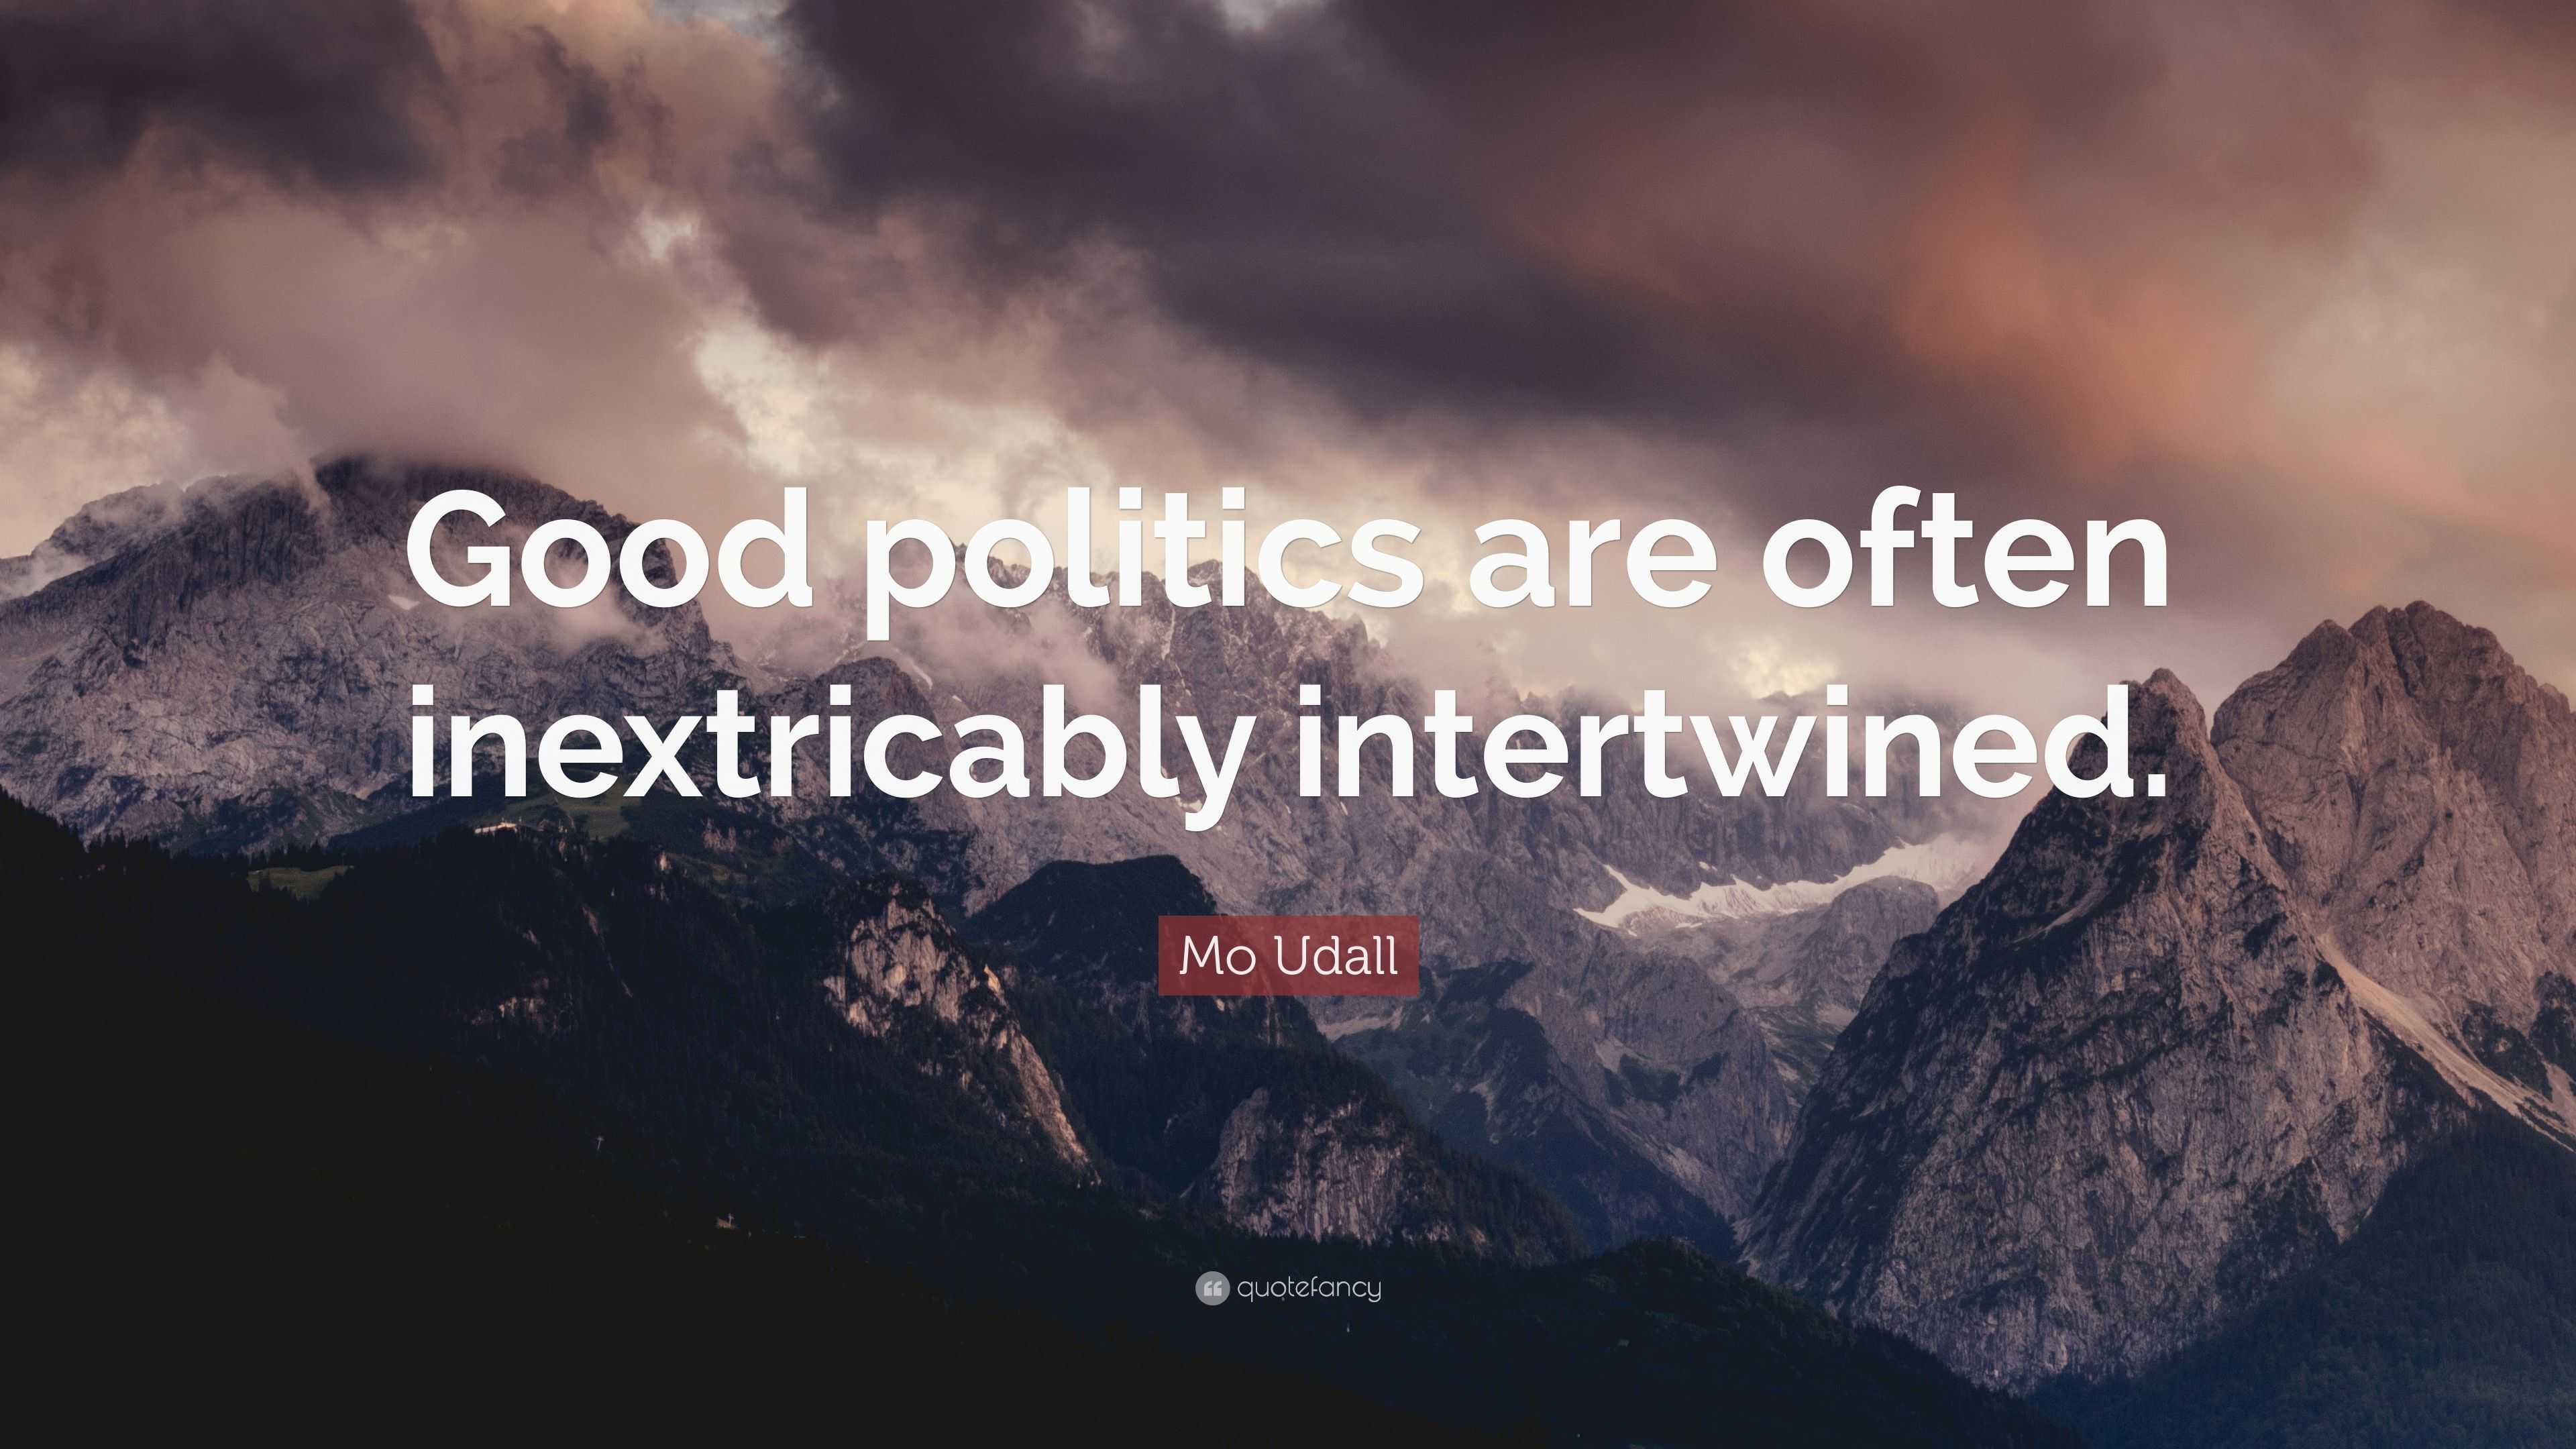 Mo Udall Quote: “Good politics are often inextricably intertwined.”